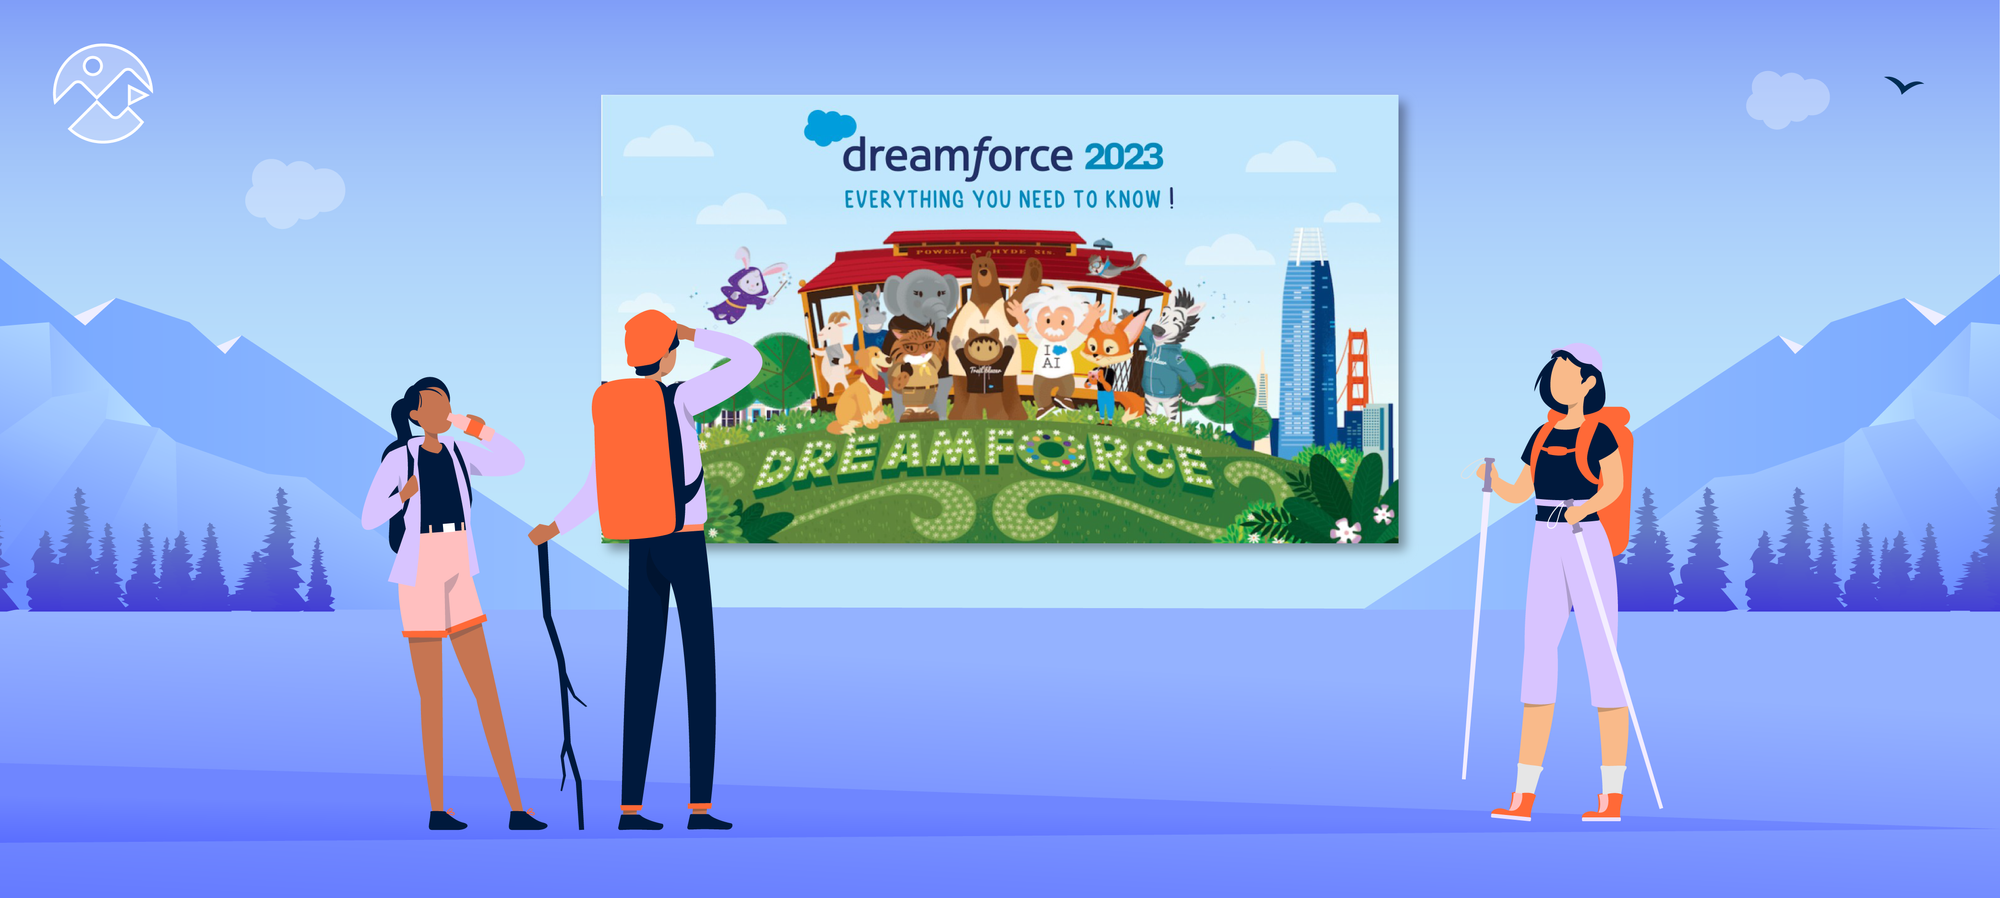 Our pick of the top 6 Dreamforce ‘23 keynote highlights